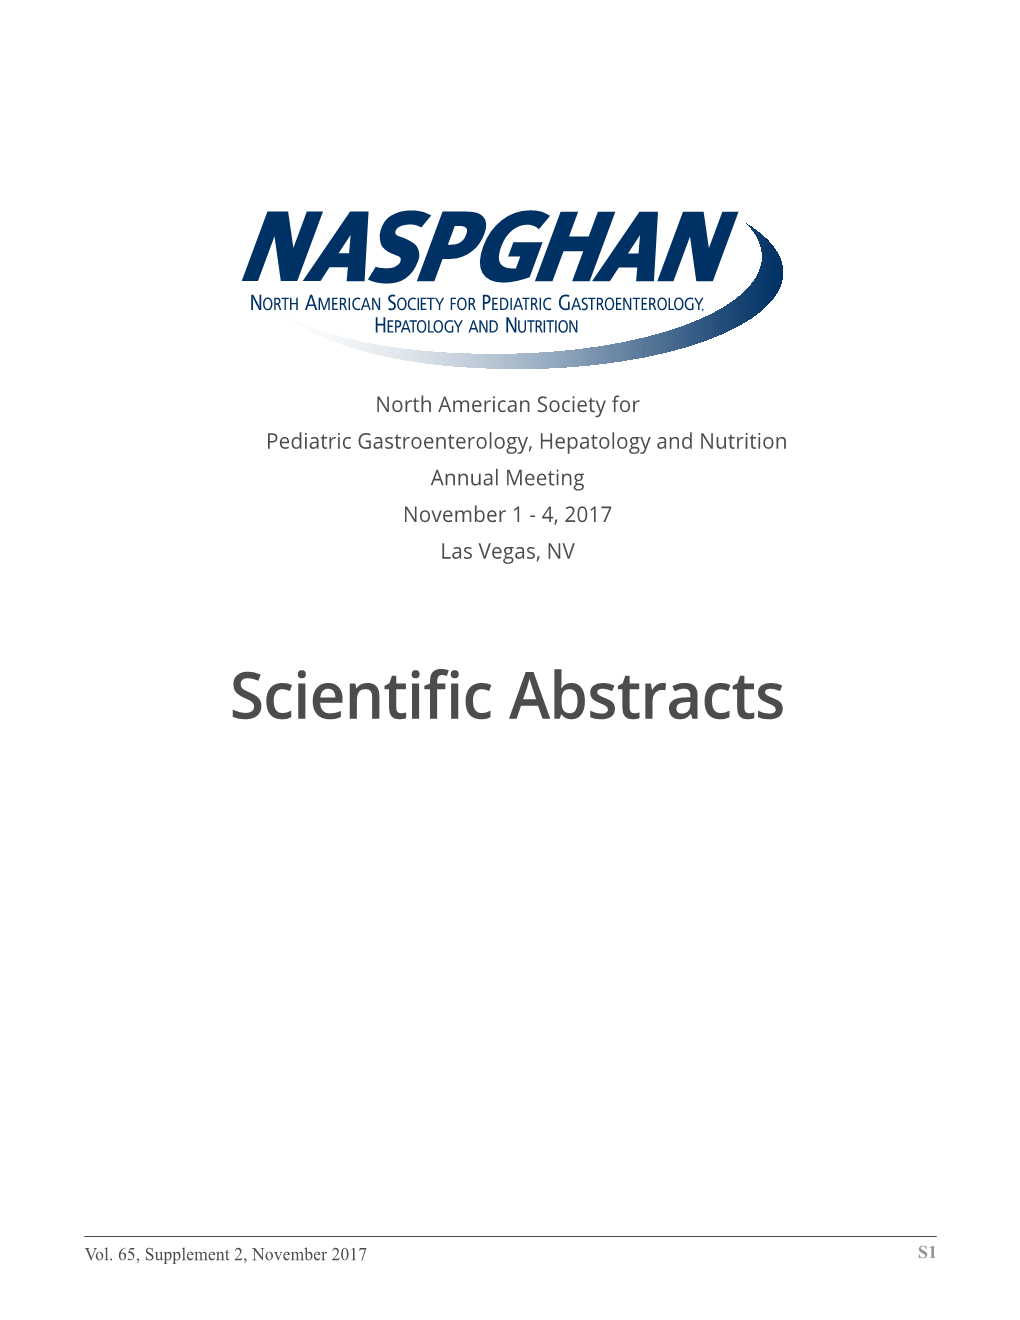 Scientific Abstracts